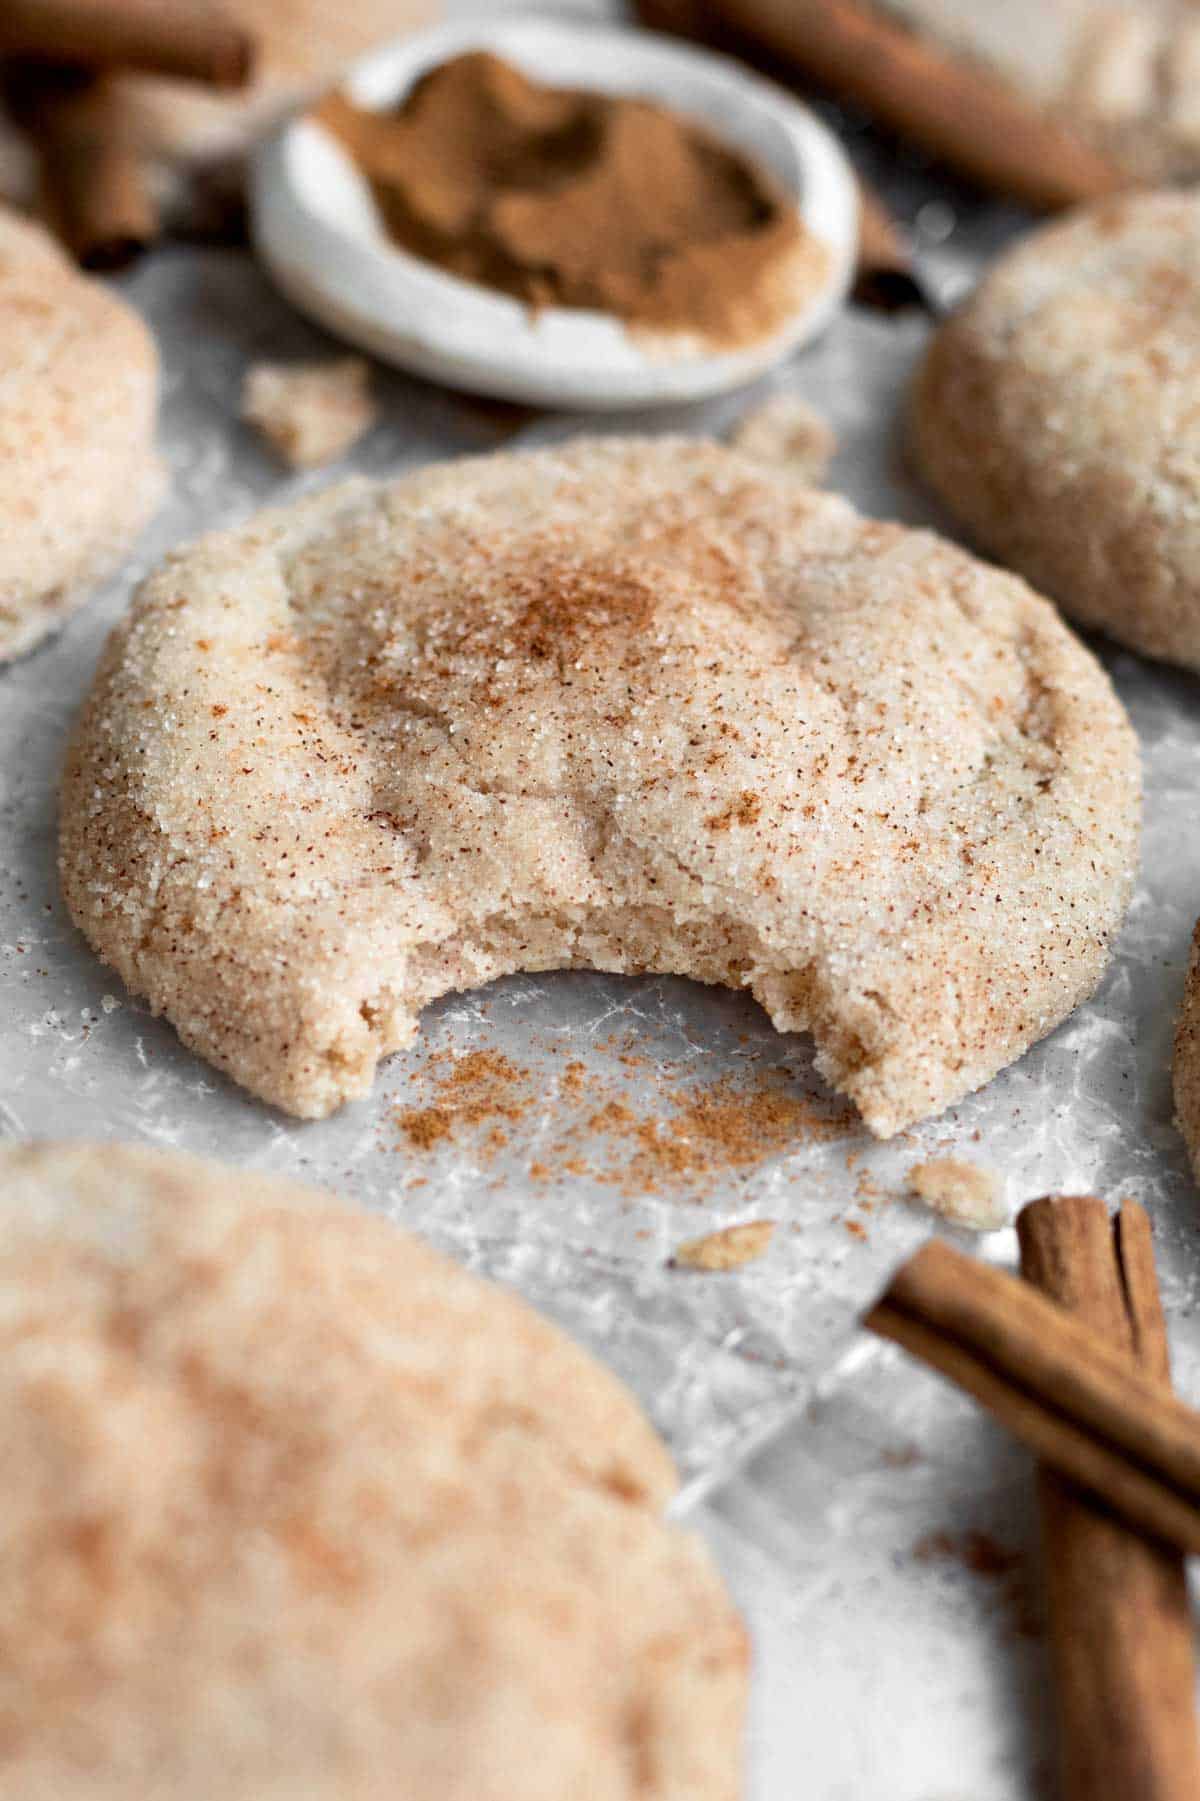 A bite reveals the soft interior of the Gluten Free Snickerdoodle Cookie.